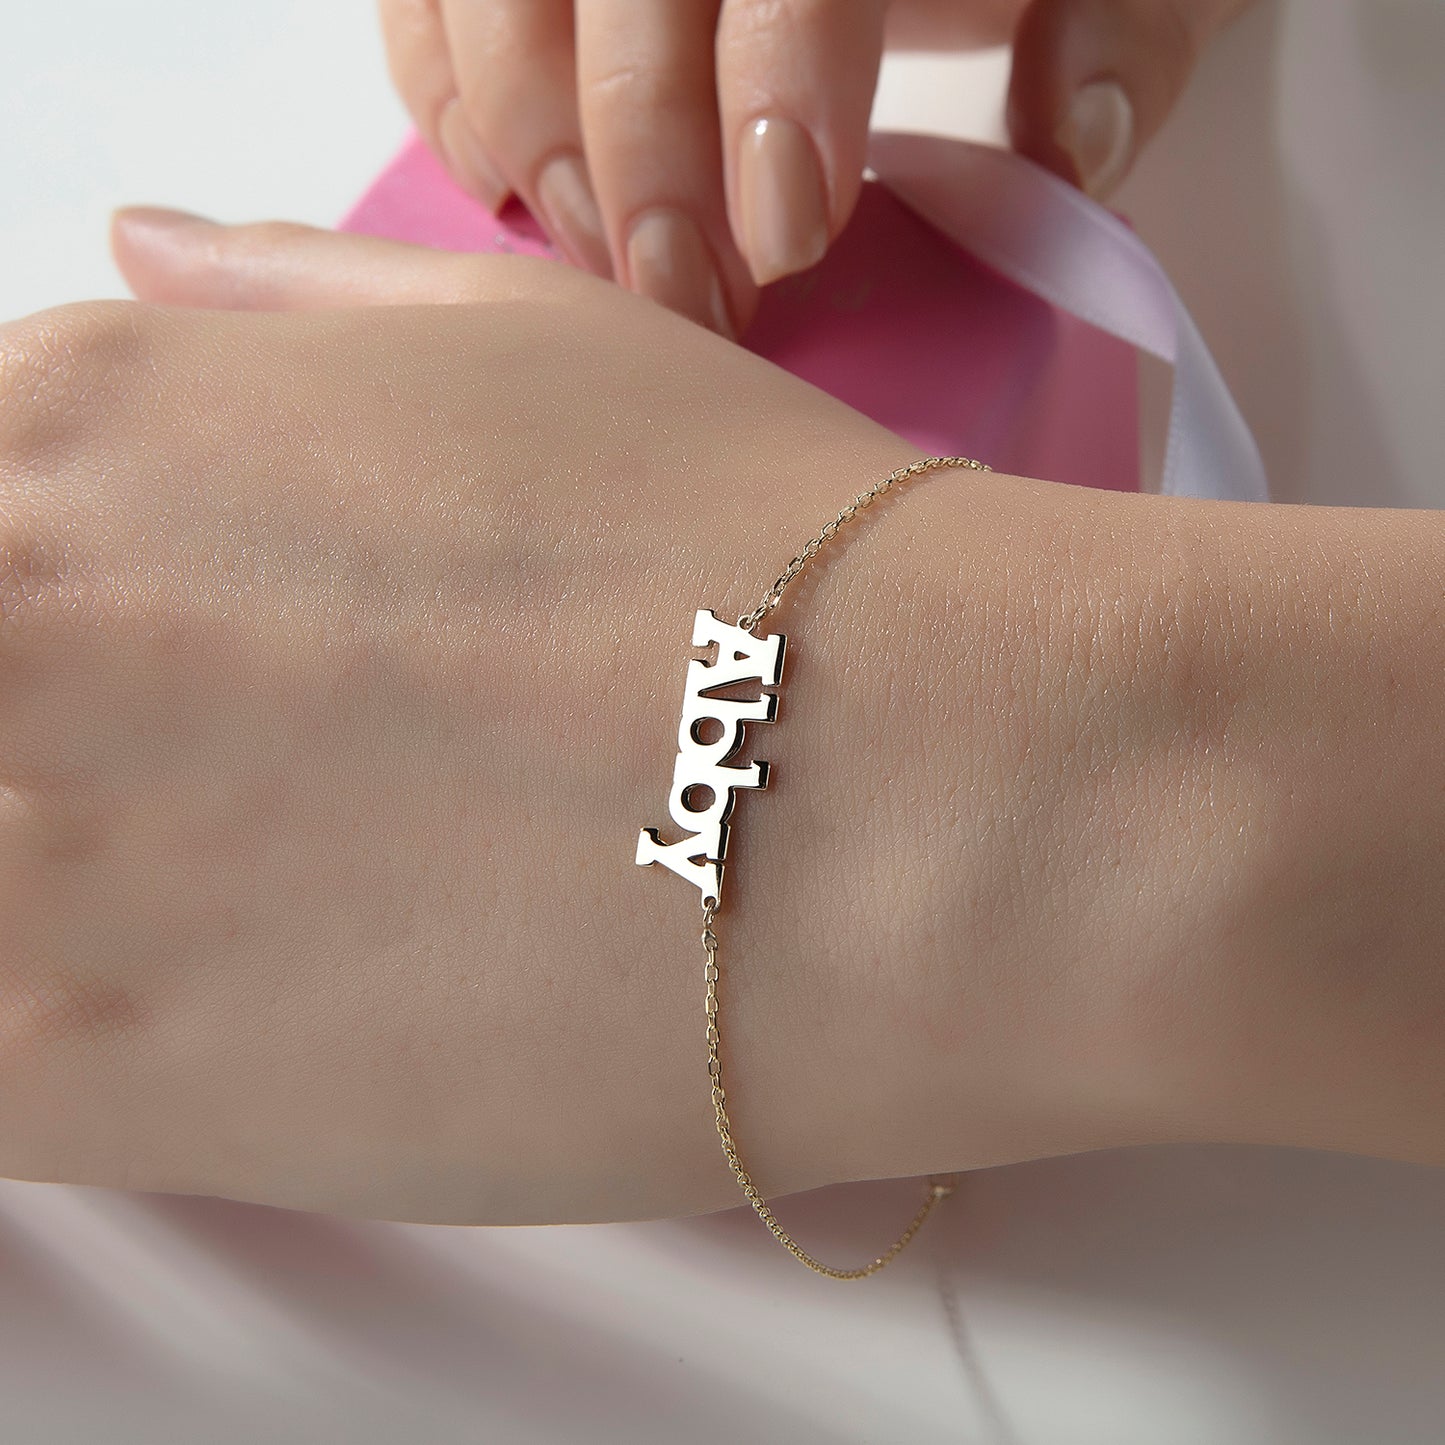 Namens Armband in Gold und Silber.